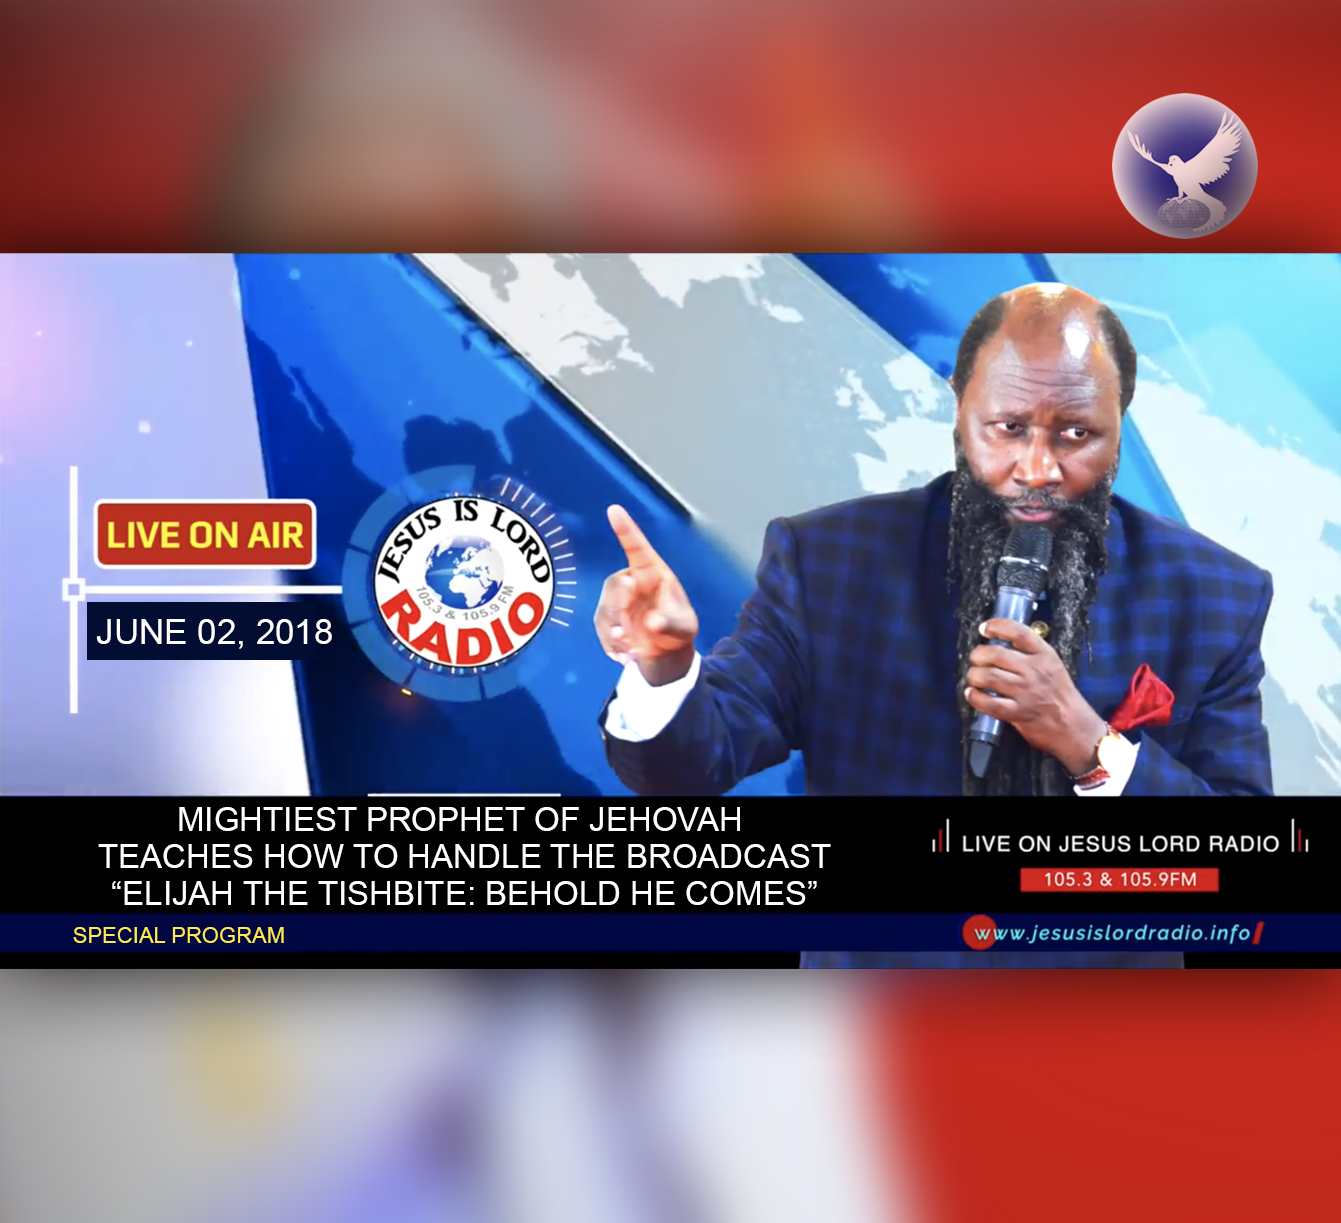 EPISODE 221 - THE MIGHTIEST PROPHET OF THE LORD CORRECTS THE HANDING OF THE BROADCAST 